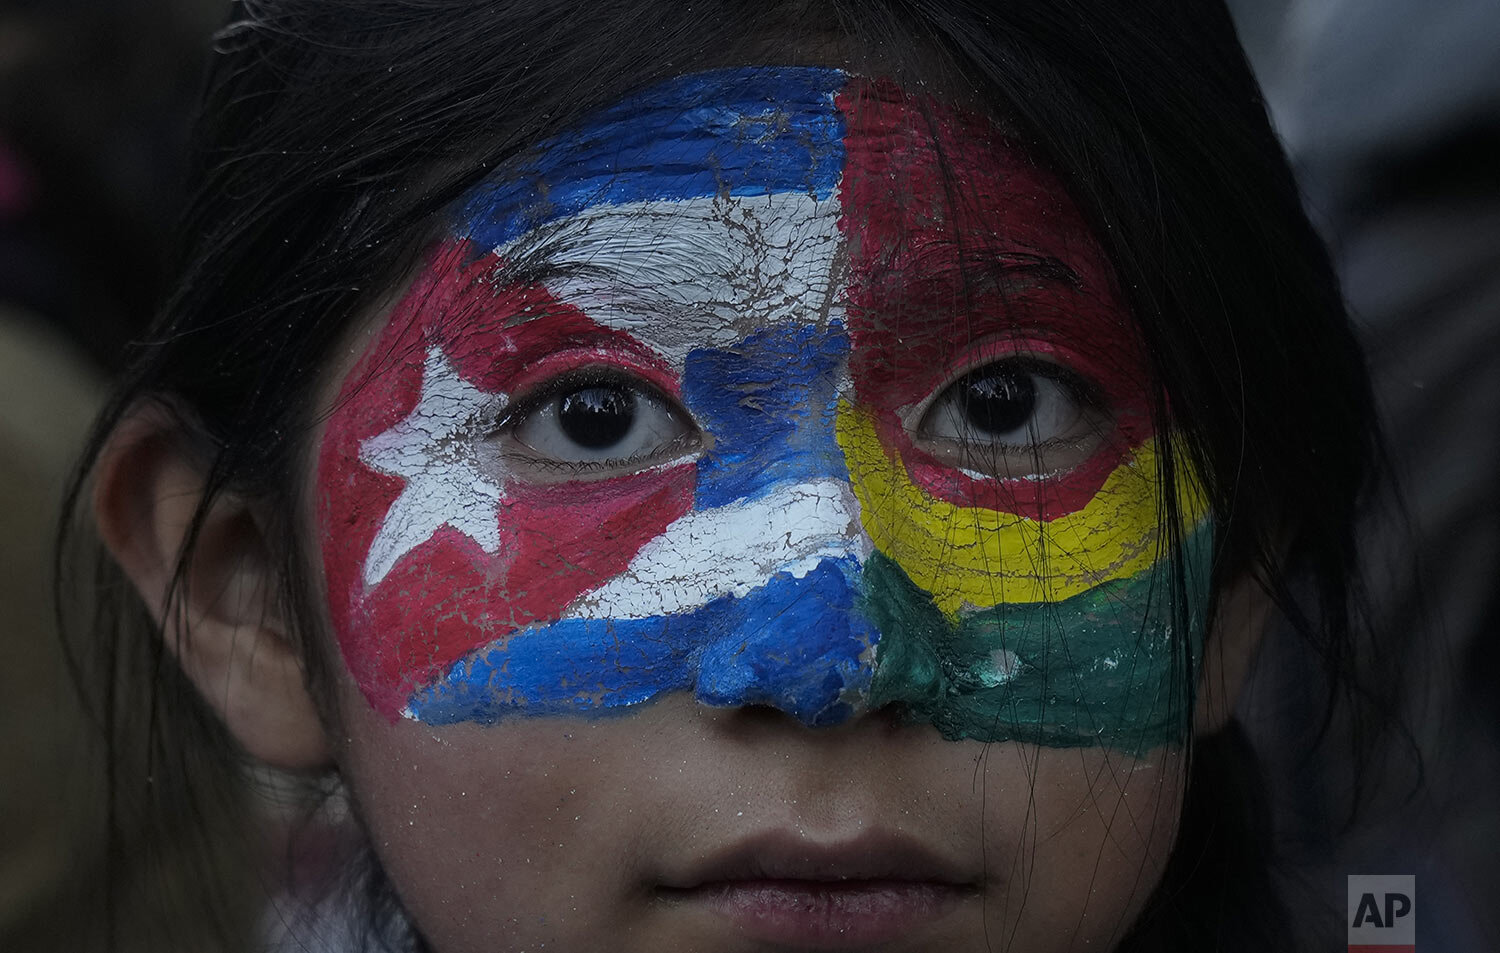  A girl with Cuban and Bolivian colors painted on her face takes part a march in support of the Cuban government, near the U.S. embassy in La Paz, Bolivia, Wednesday, July 14, 2021. The march came about after a rare weekend of protests against the co